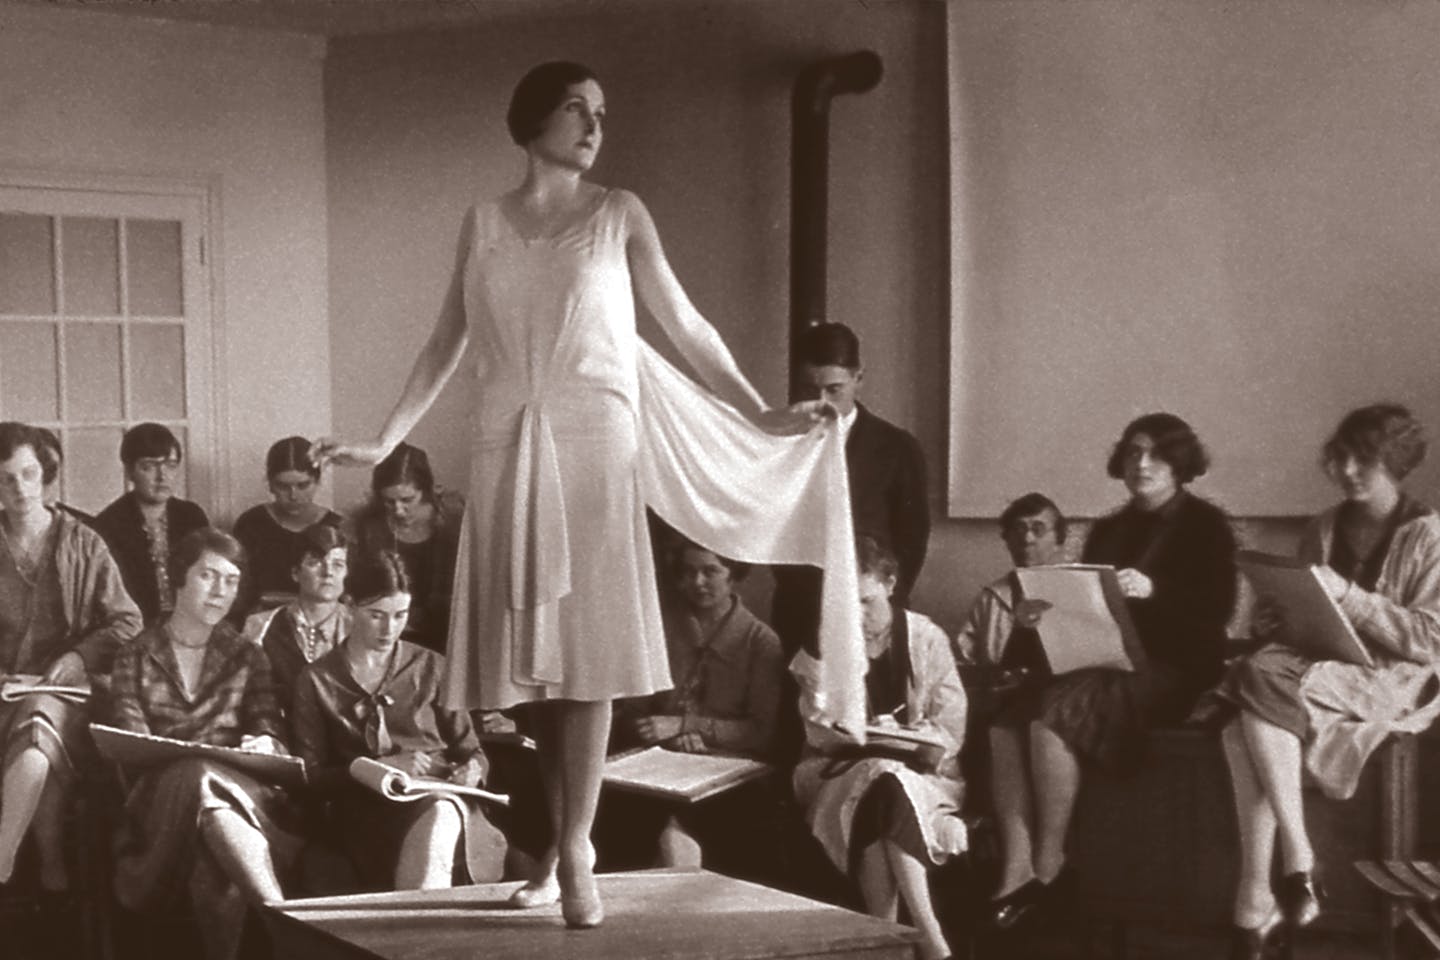 A model in a white dress poses on a platform surrounded by students drawing her. From the 1920's.